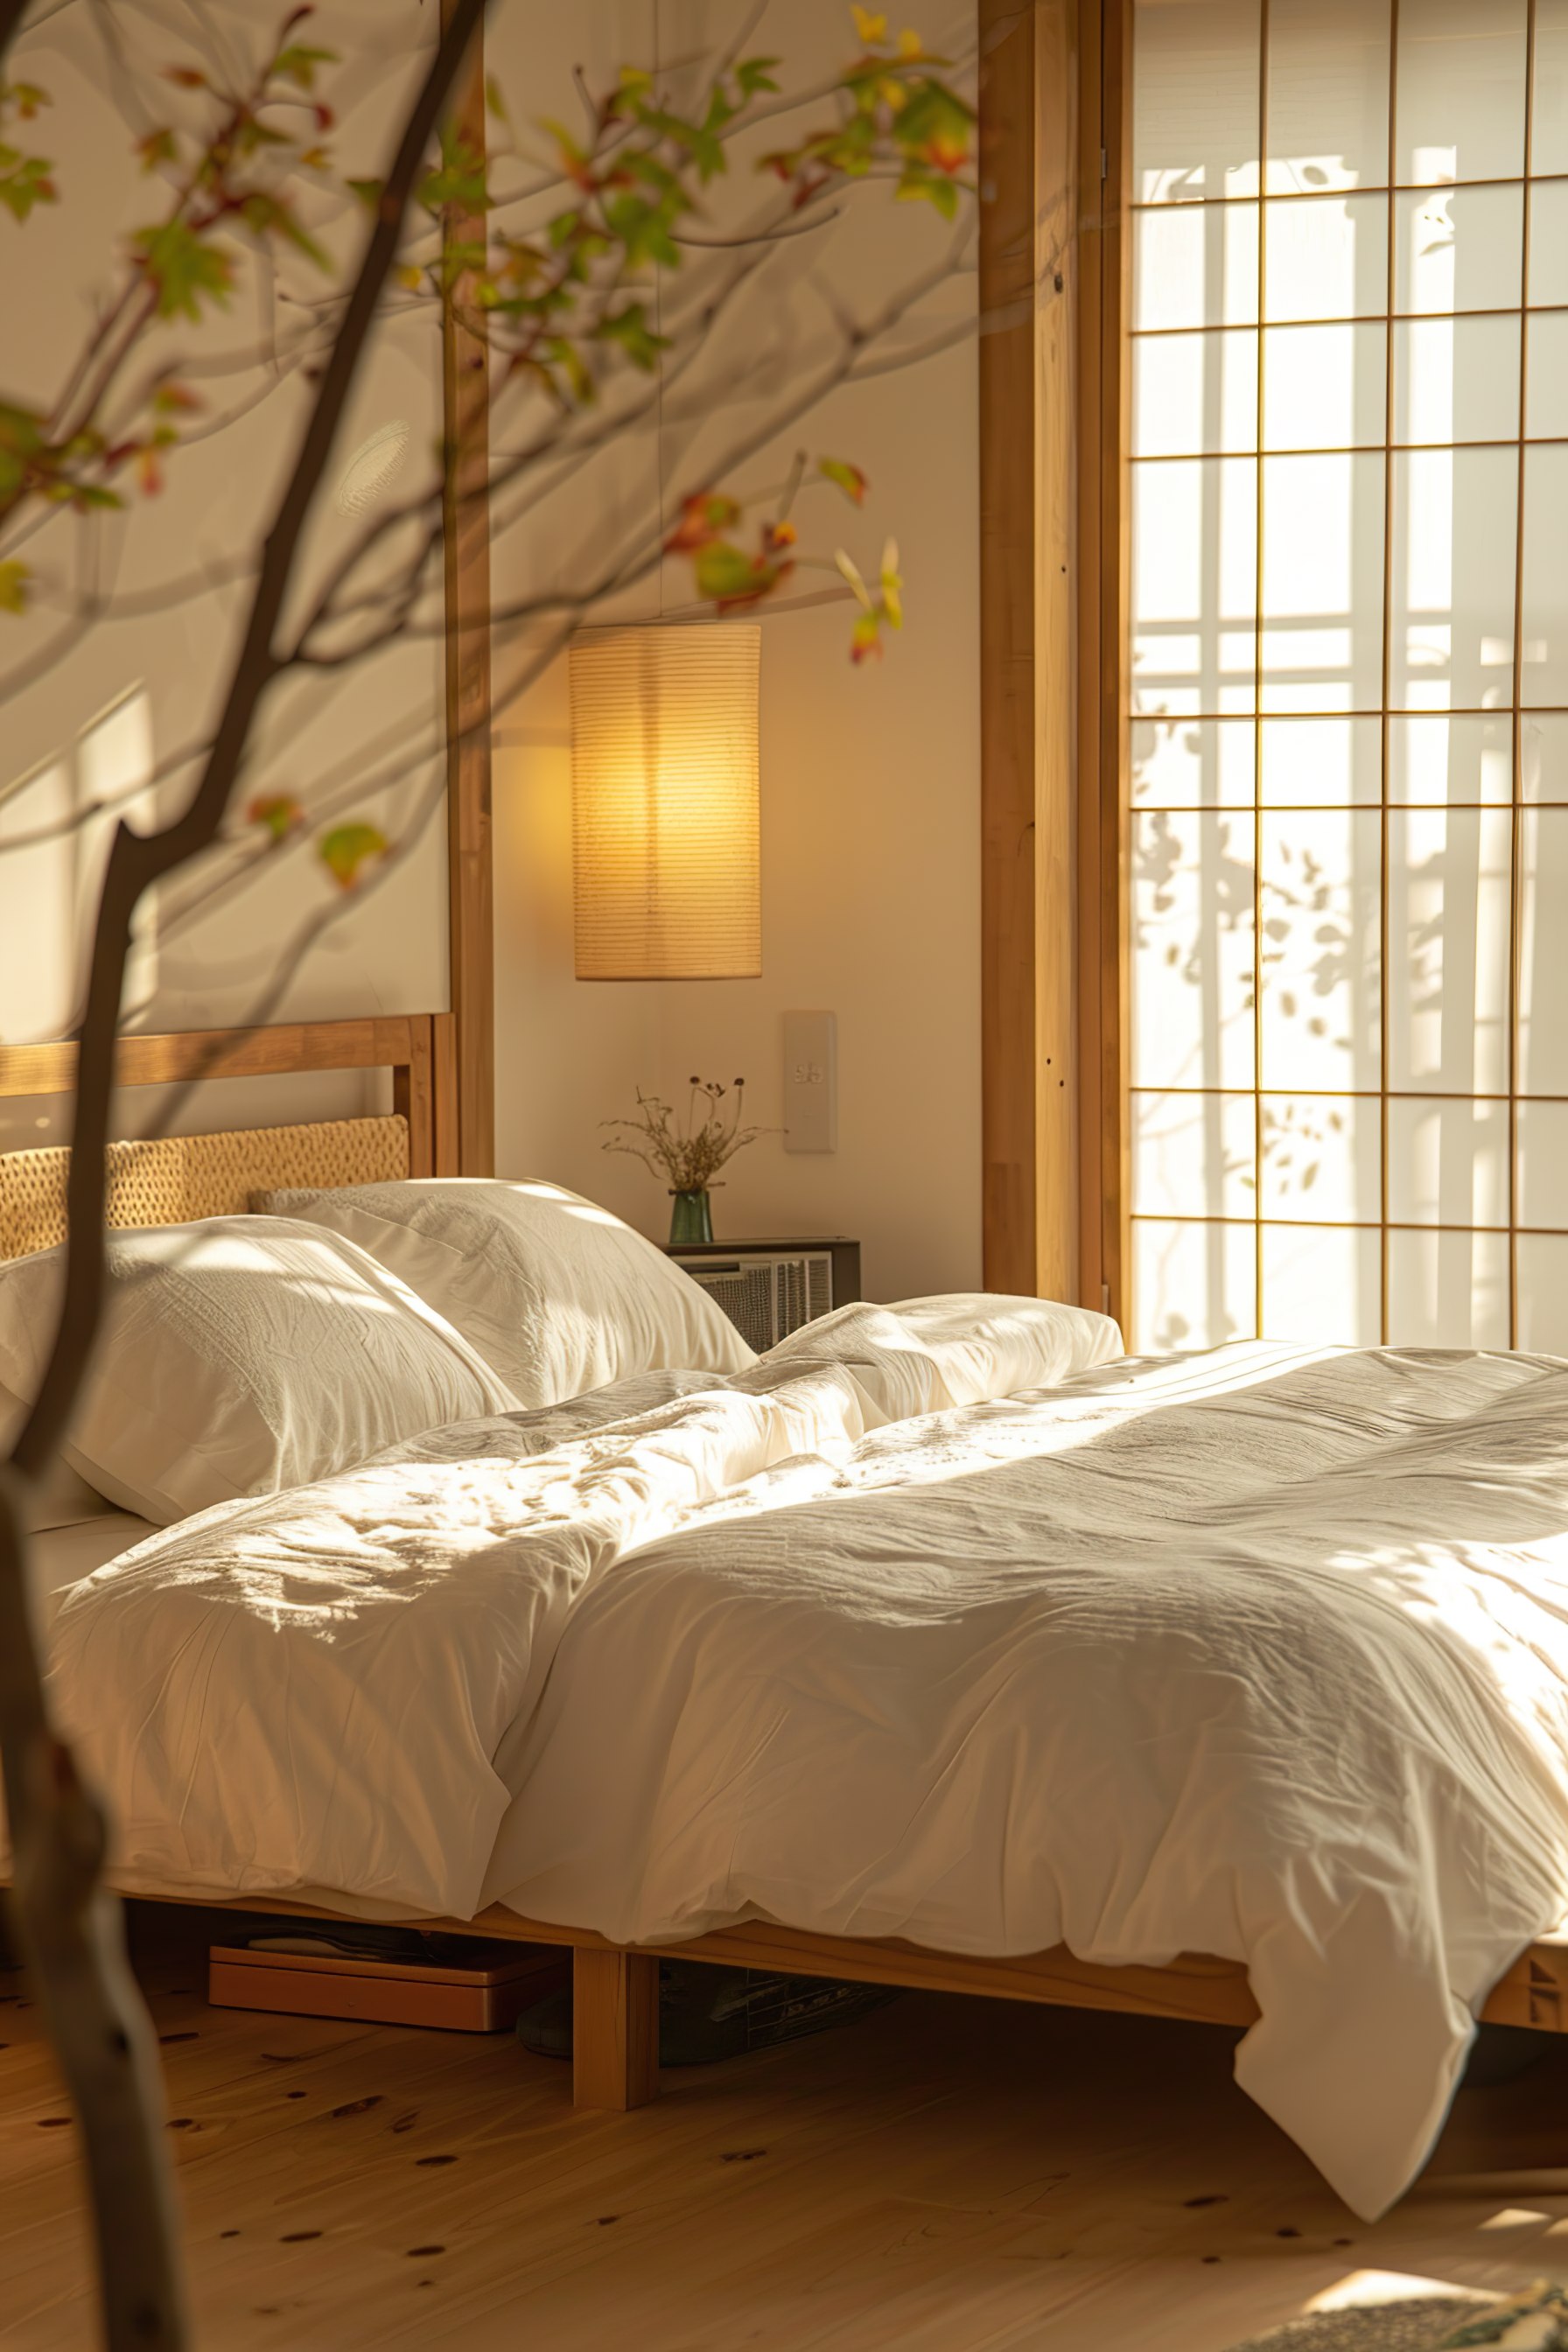 A cozy bedroom with a wooden framed bed covered in white bedding, warm sunlight streaming through shoji screen windows, and a bedside lamp.